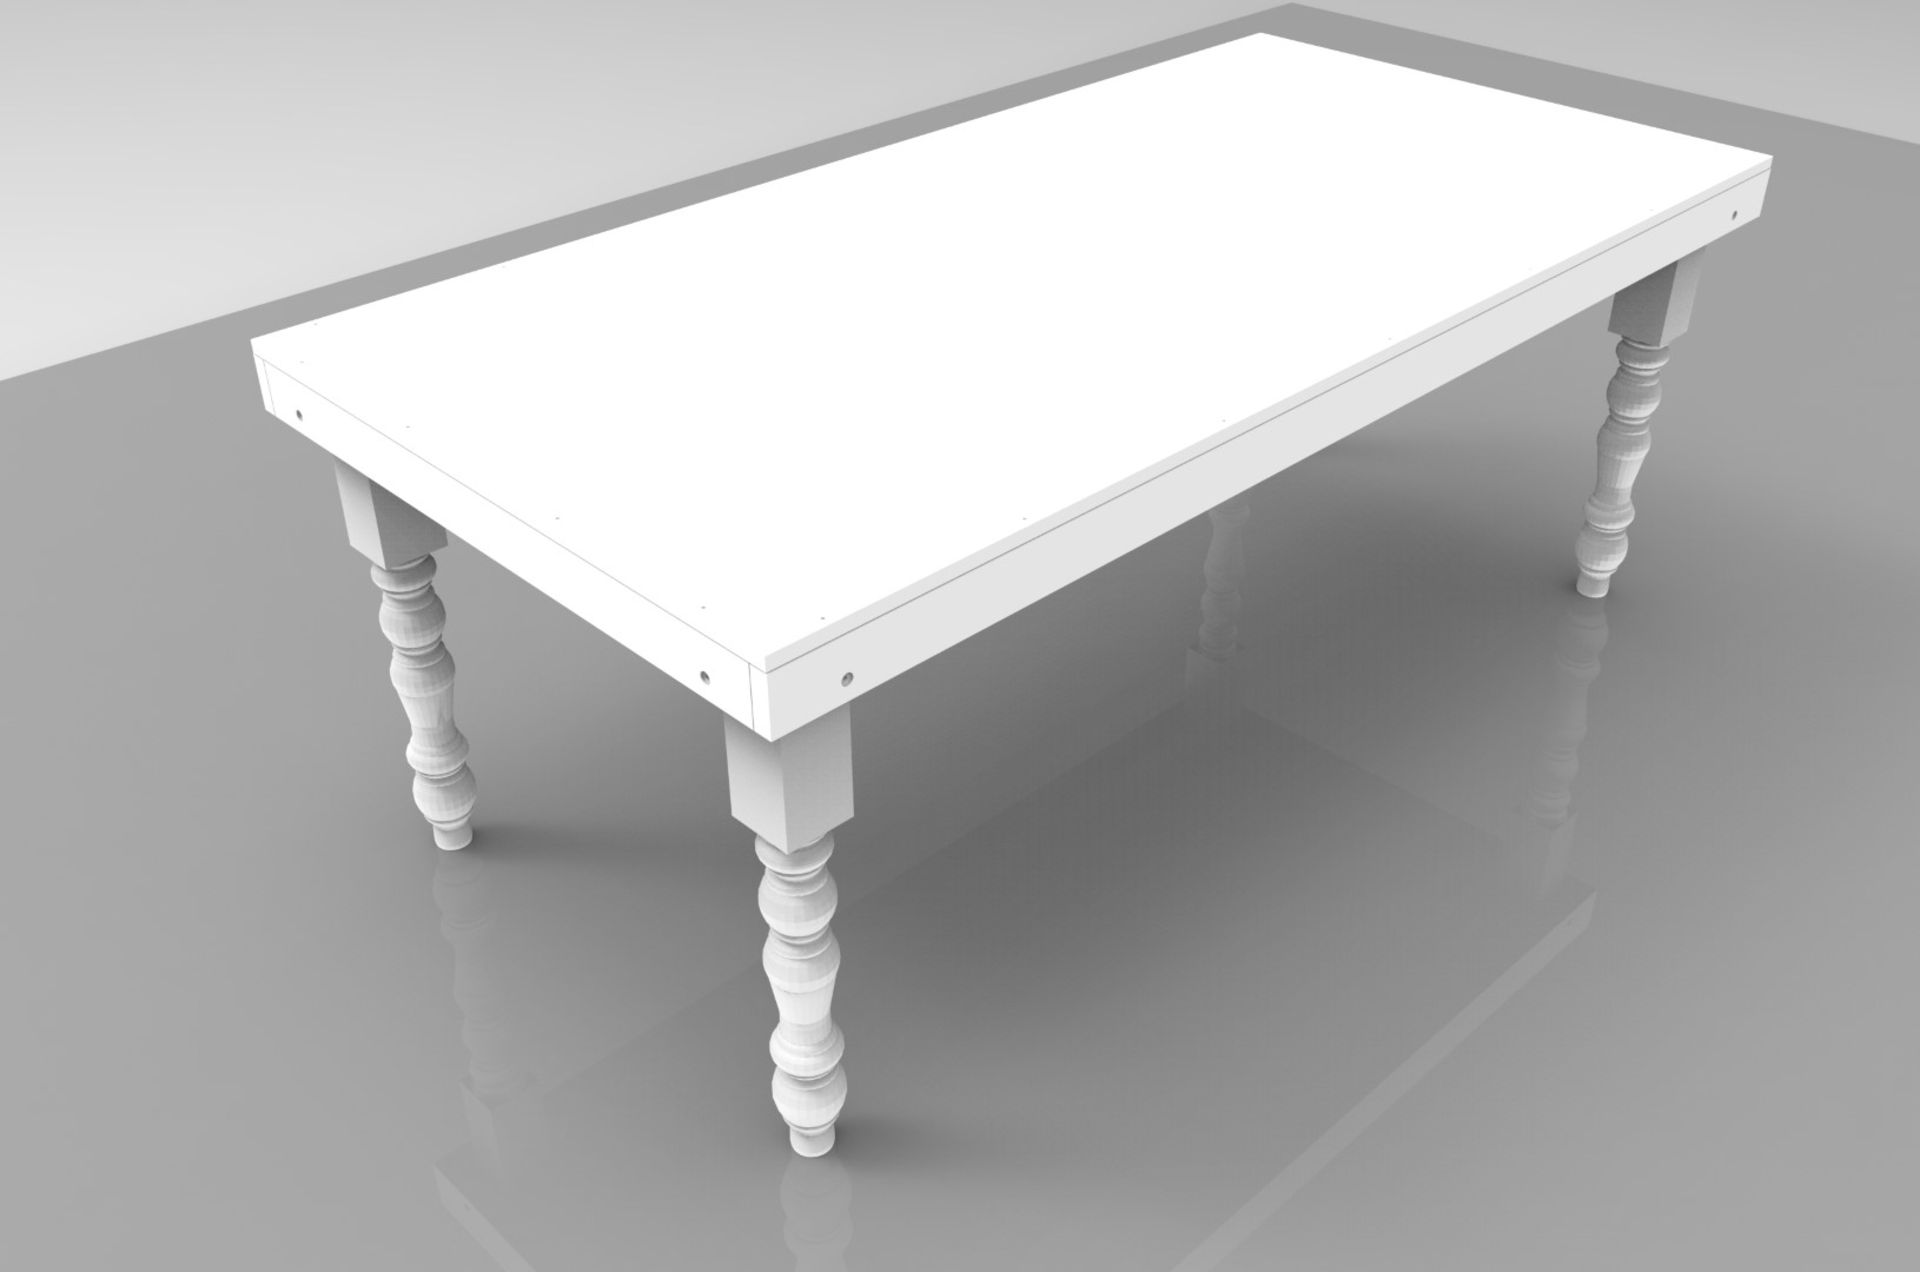 5 x Bespoke Rectangular Commercial Event / Dining Tables In White - Dimensions: 198cm x D99 x H74cm - Image 4 of 5